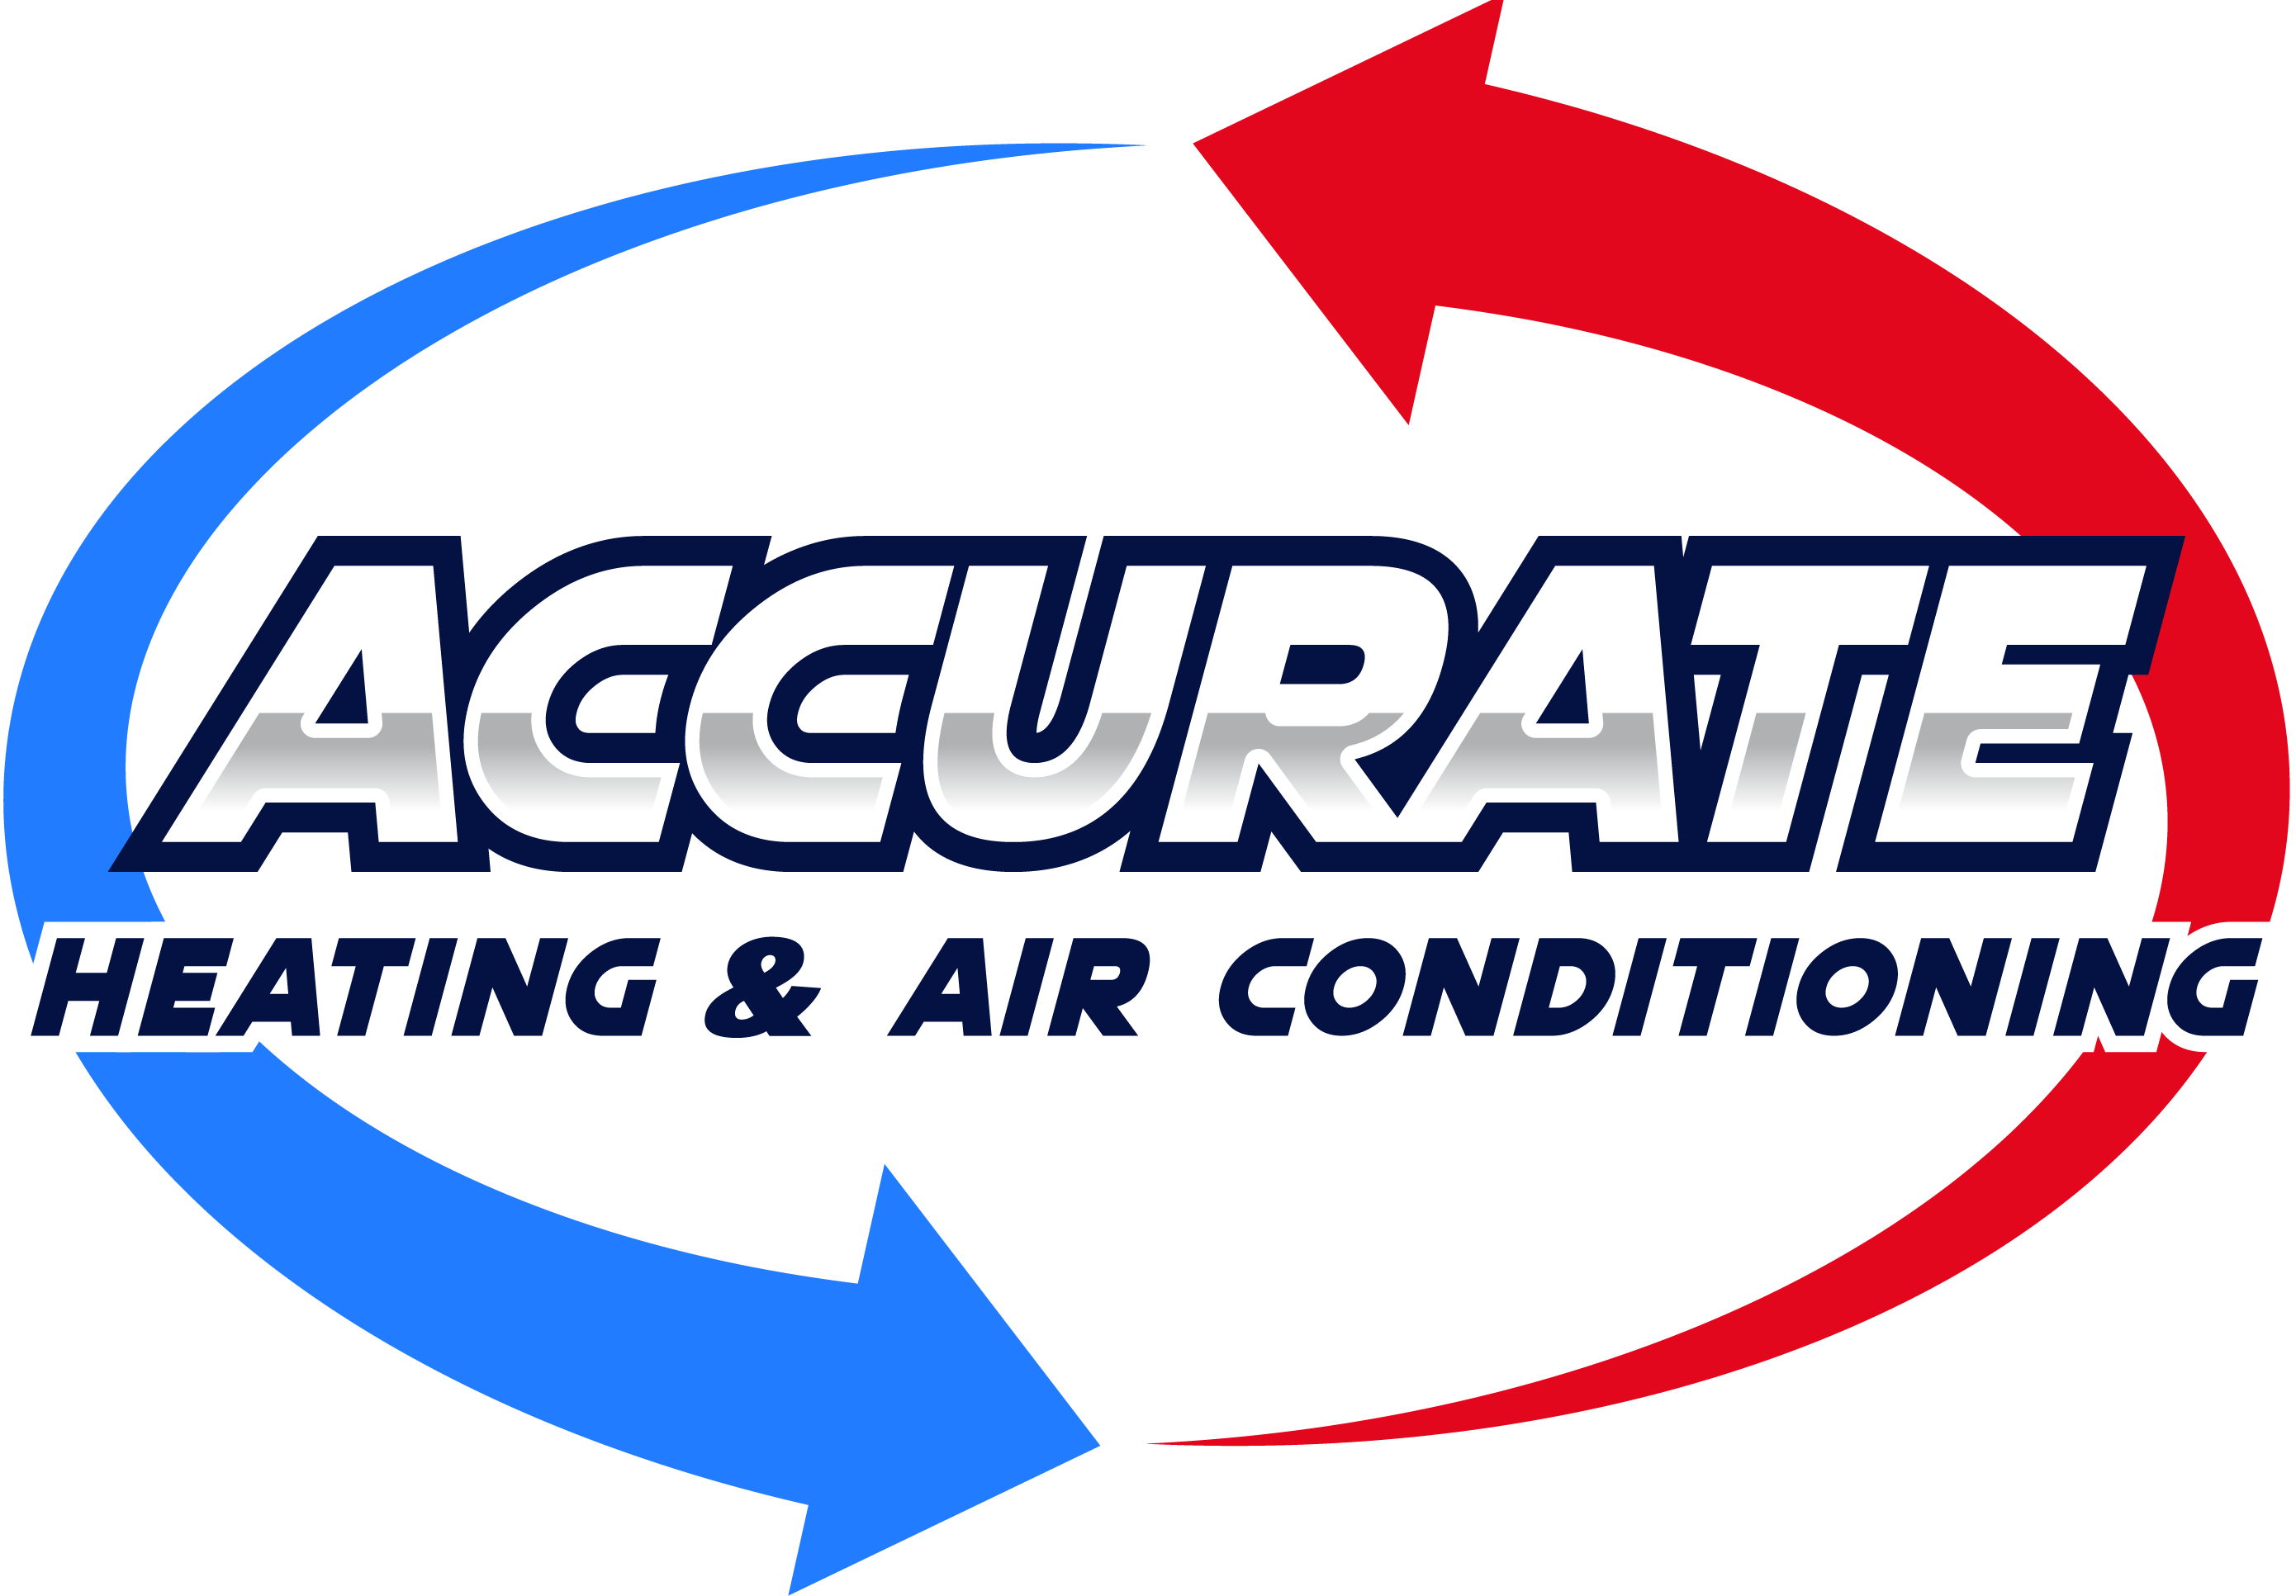 HVAC Contractor - Accurate Heating & Air Conditioning